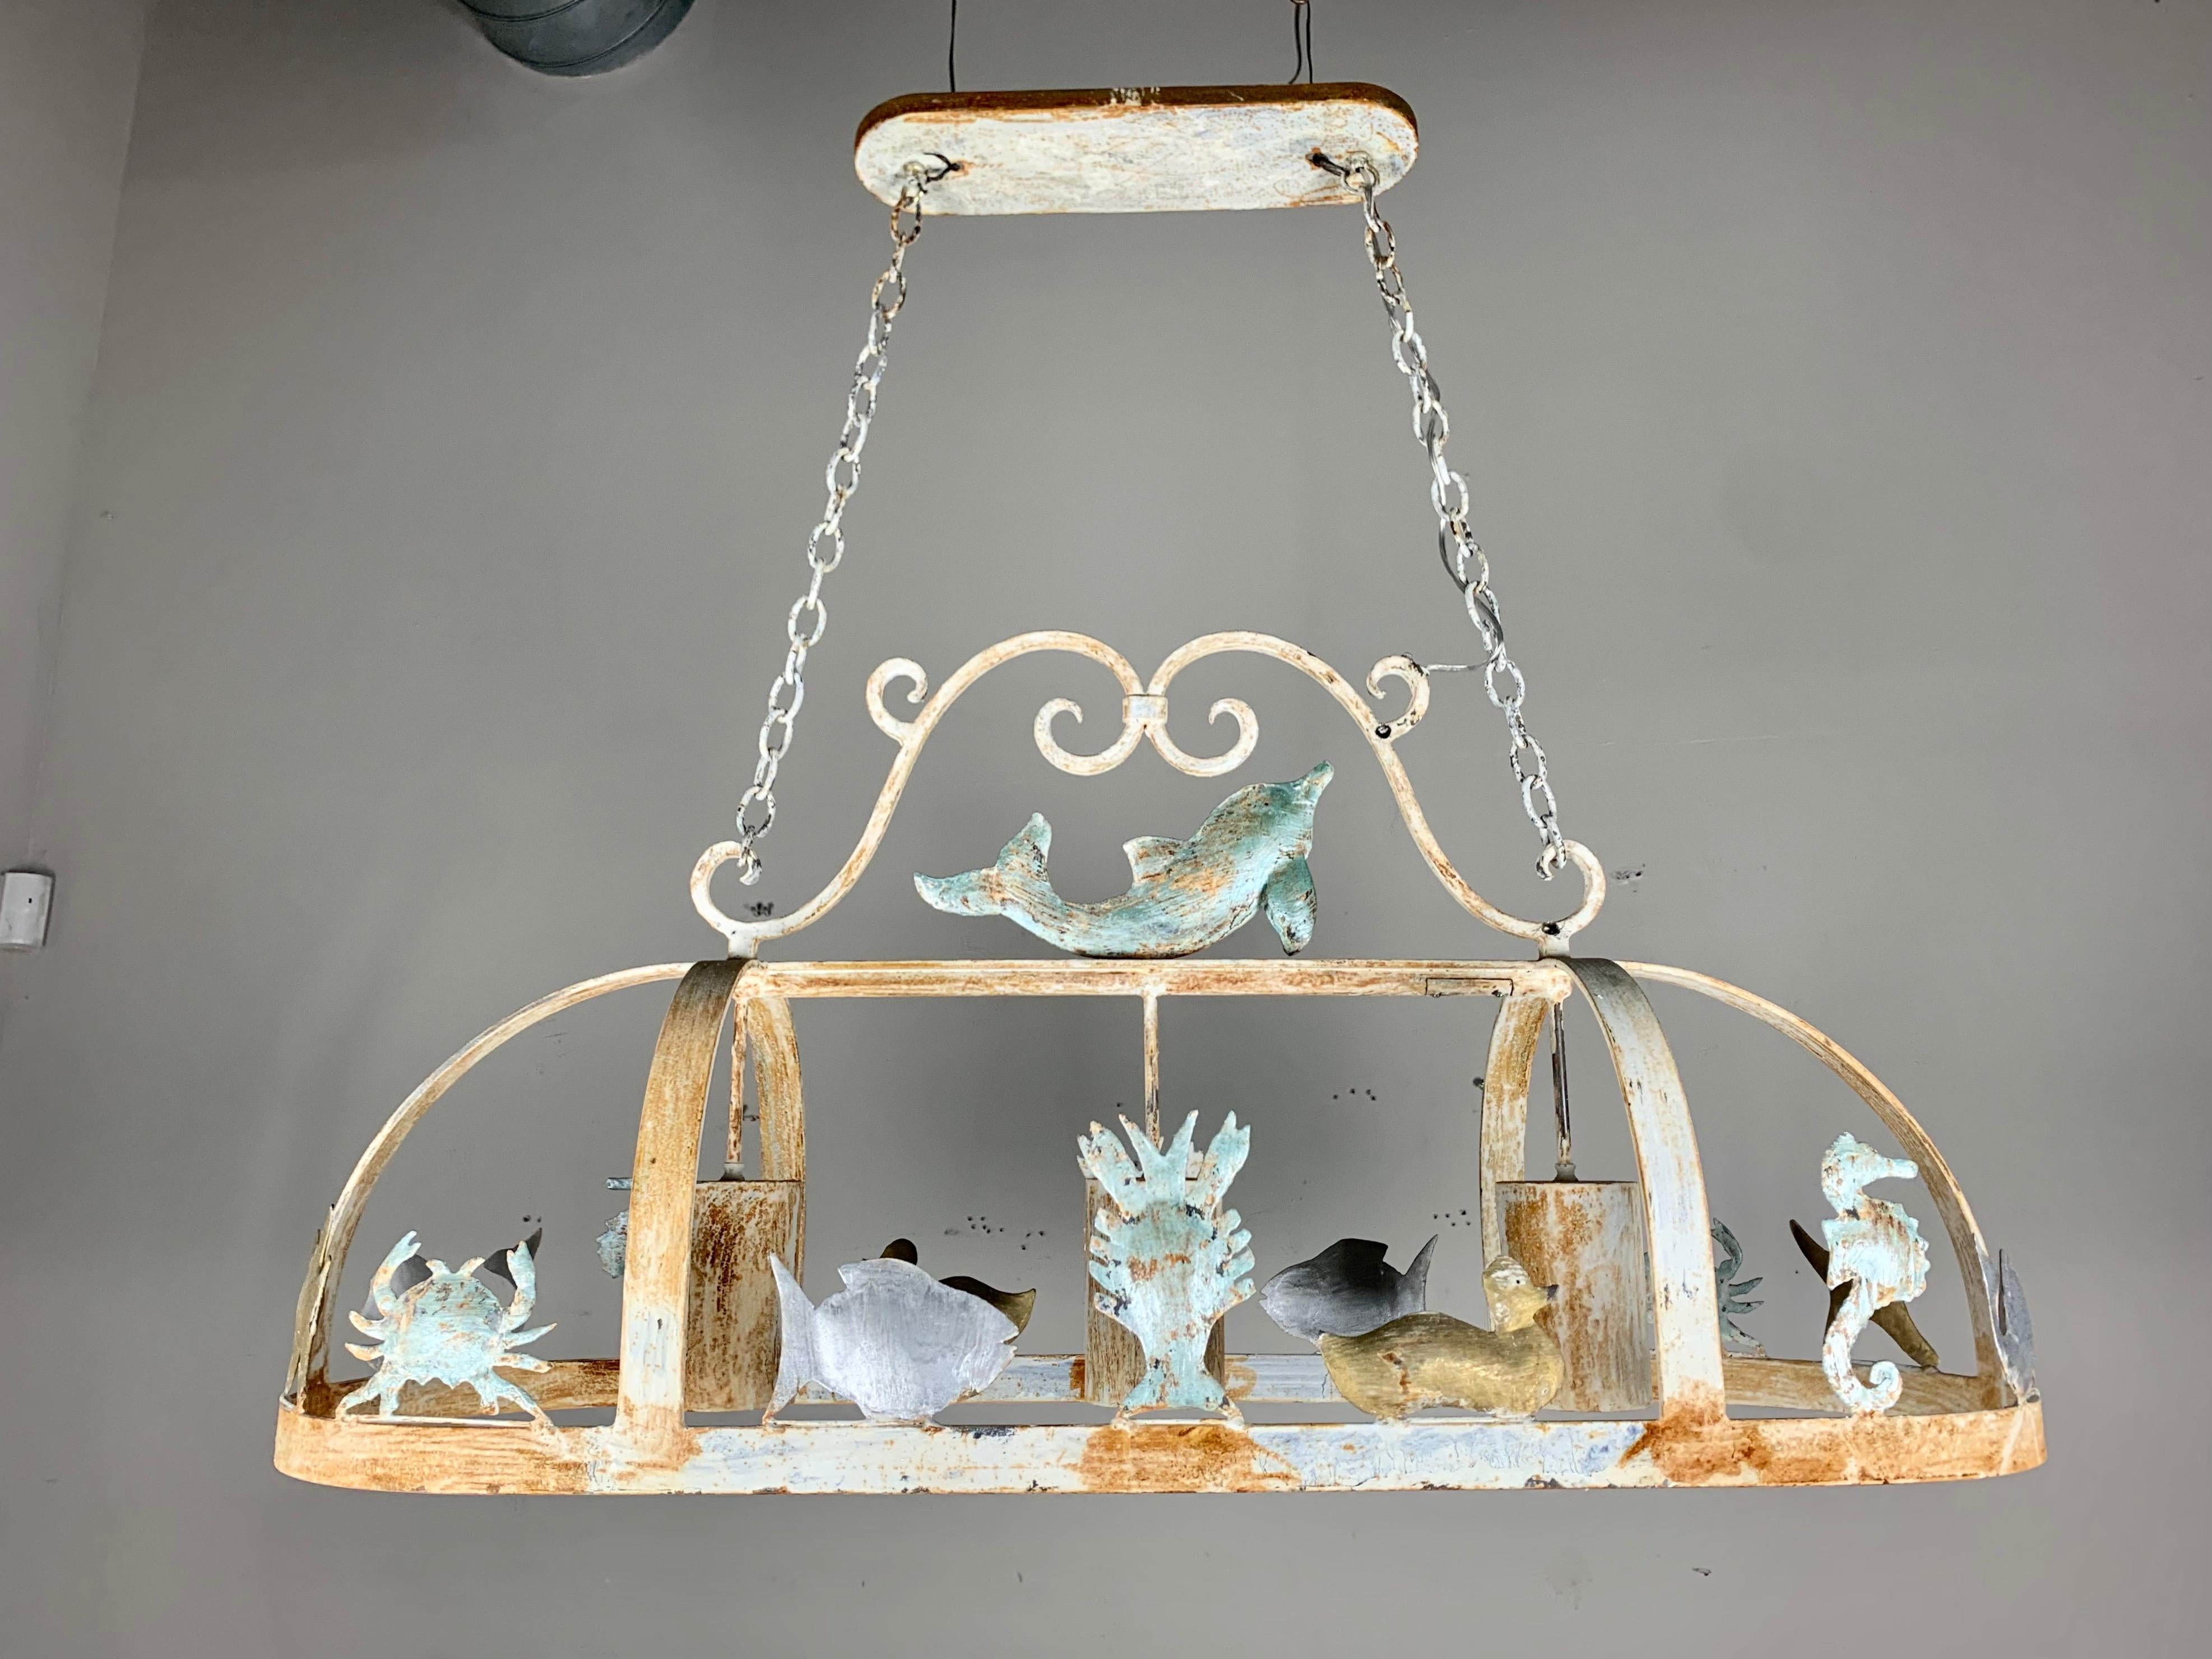 Unique wrought iron painted pot rack depicting an ocean theme with dolphins, crabs, fish, seahorses, and more. The paint is beautifully worn throughout. The fixture has three standard size sockets for plenty of light. It is newly rewired and ready